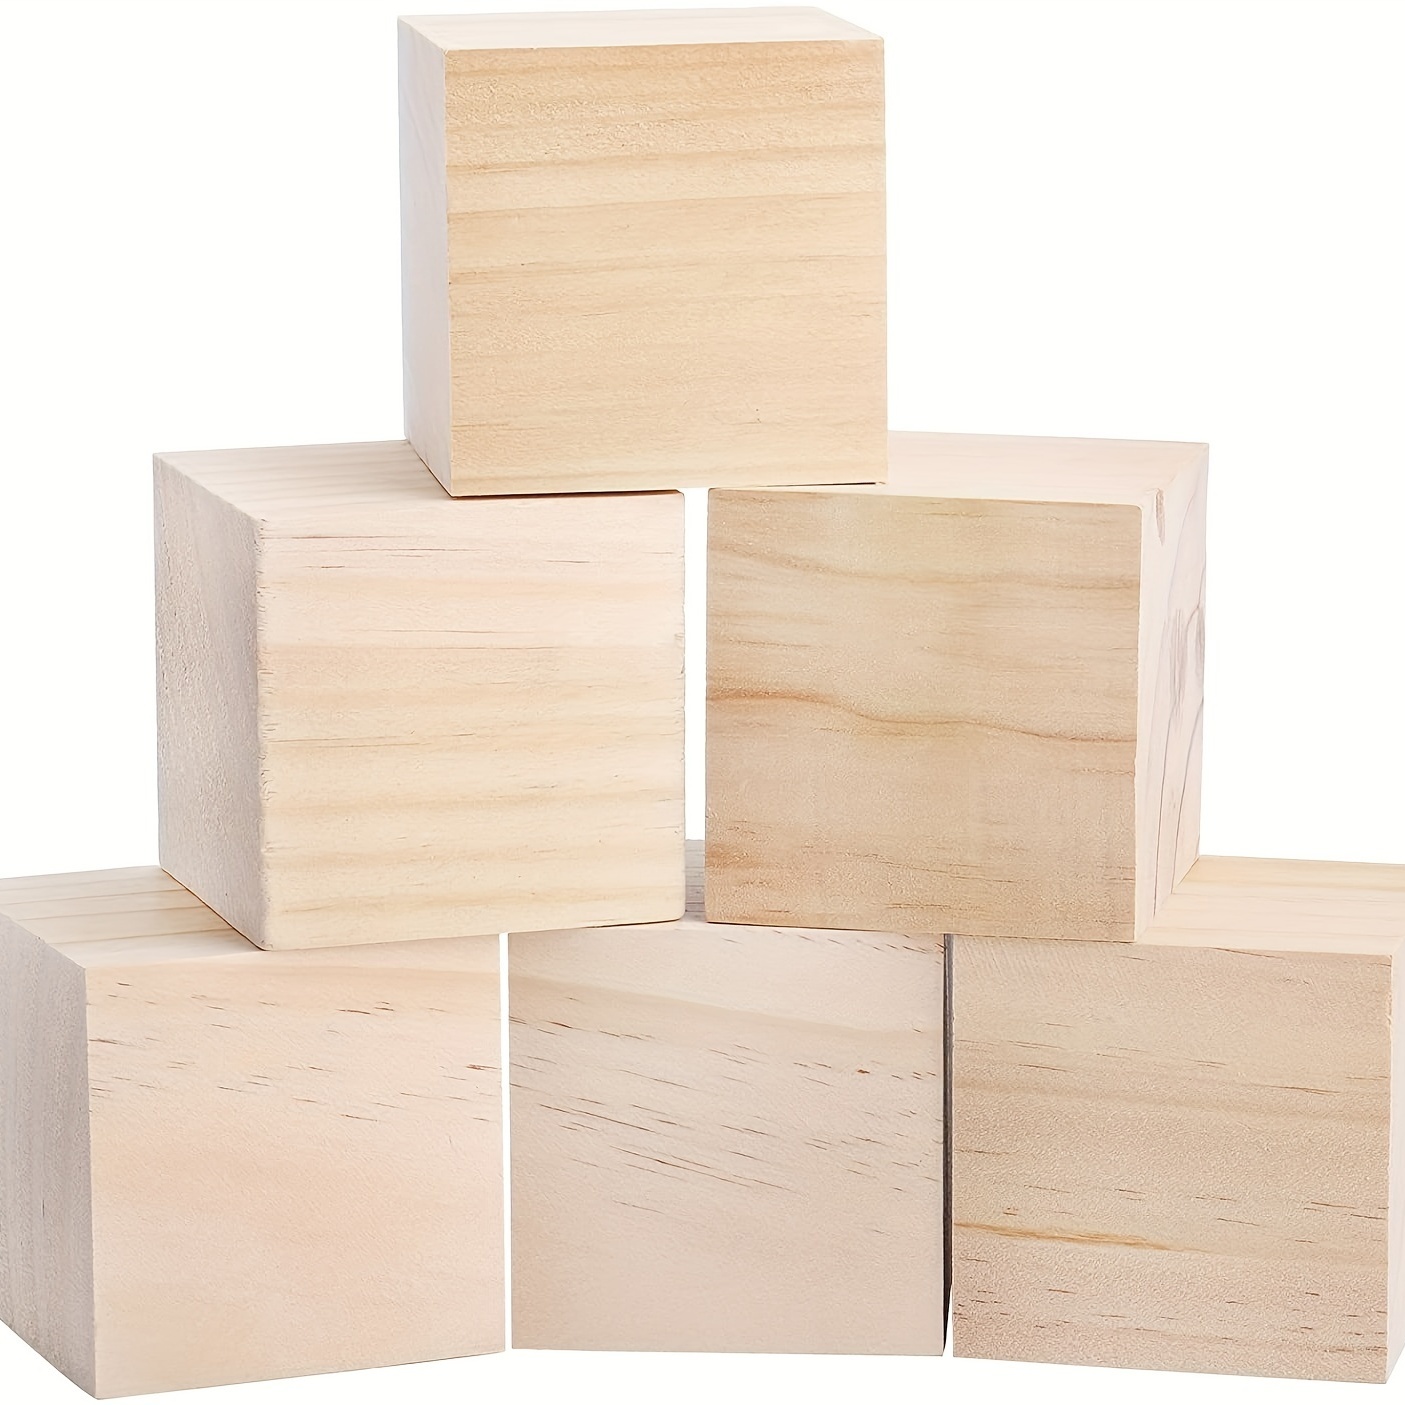 Unfinished Wood Cubes 3 inch, Pack of 2 Large Wooden Cubes for Wood Blocks Crafts and Decor, by Woodpeckers